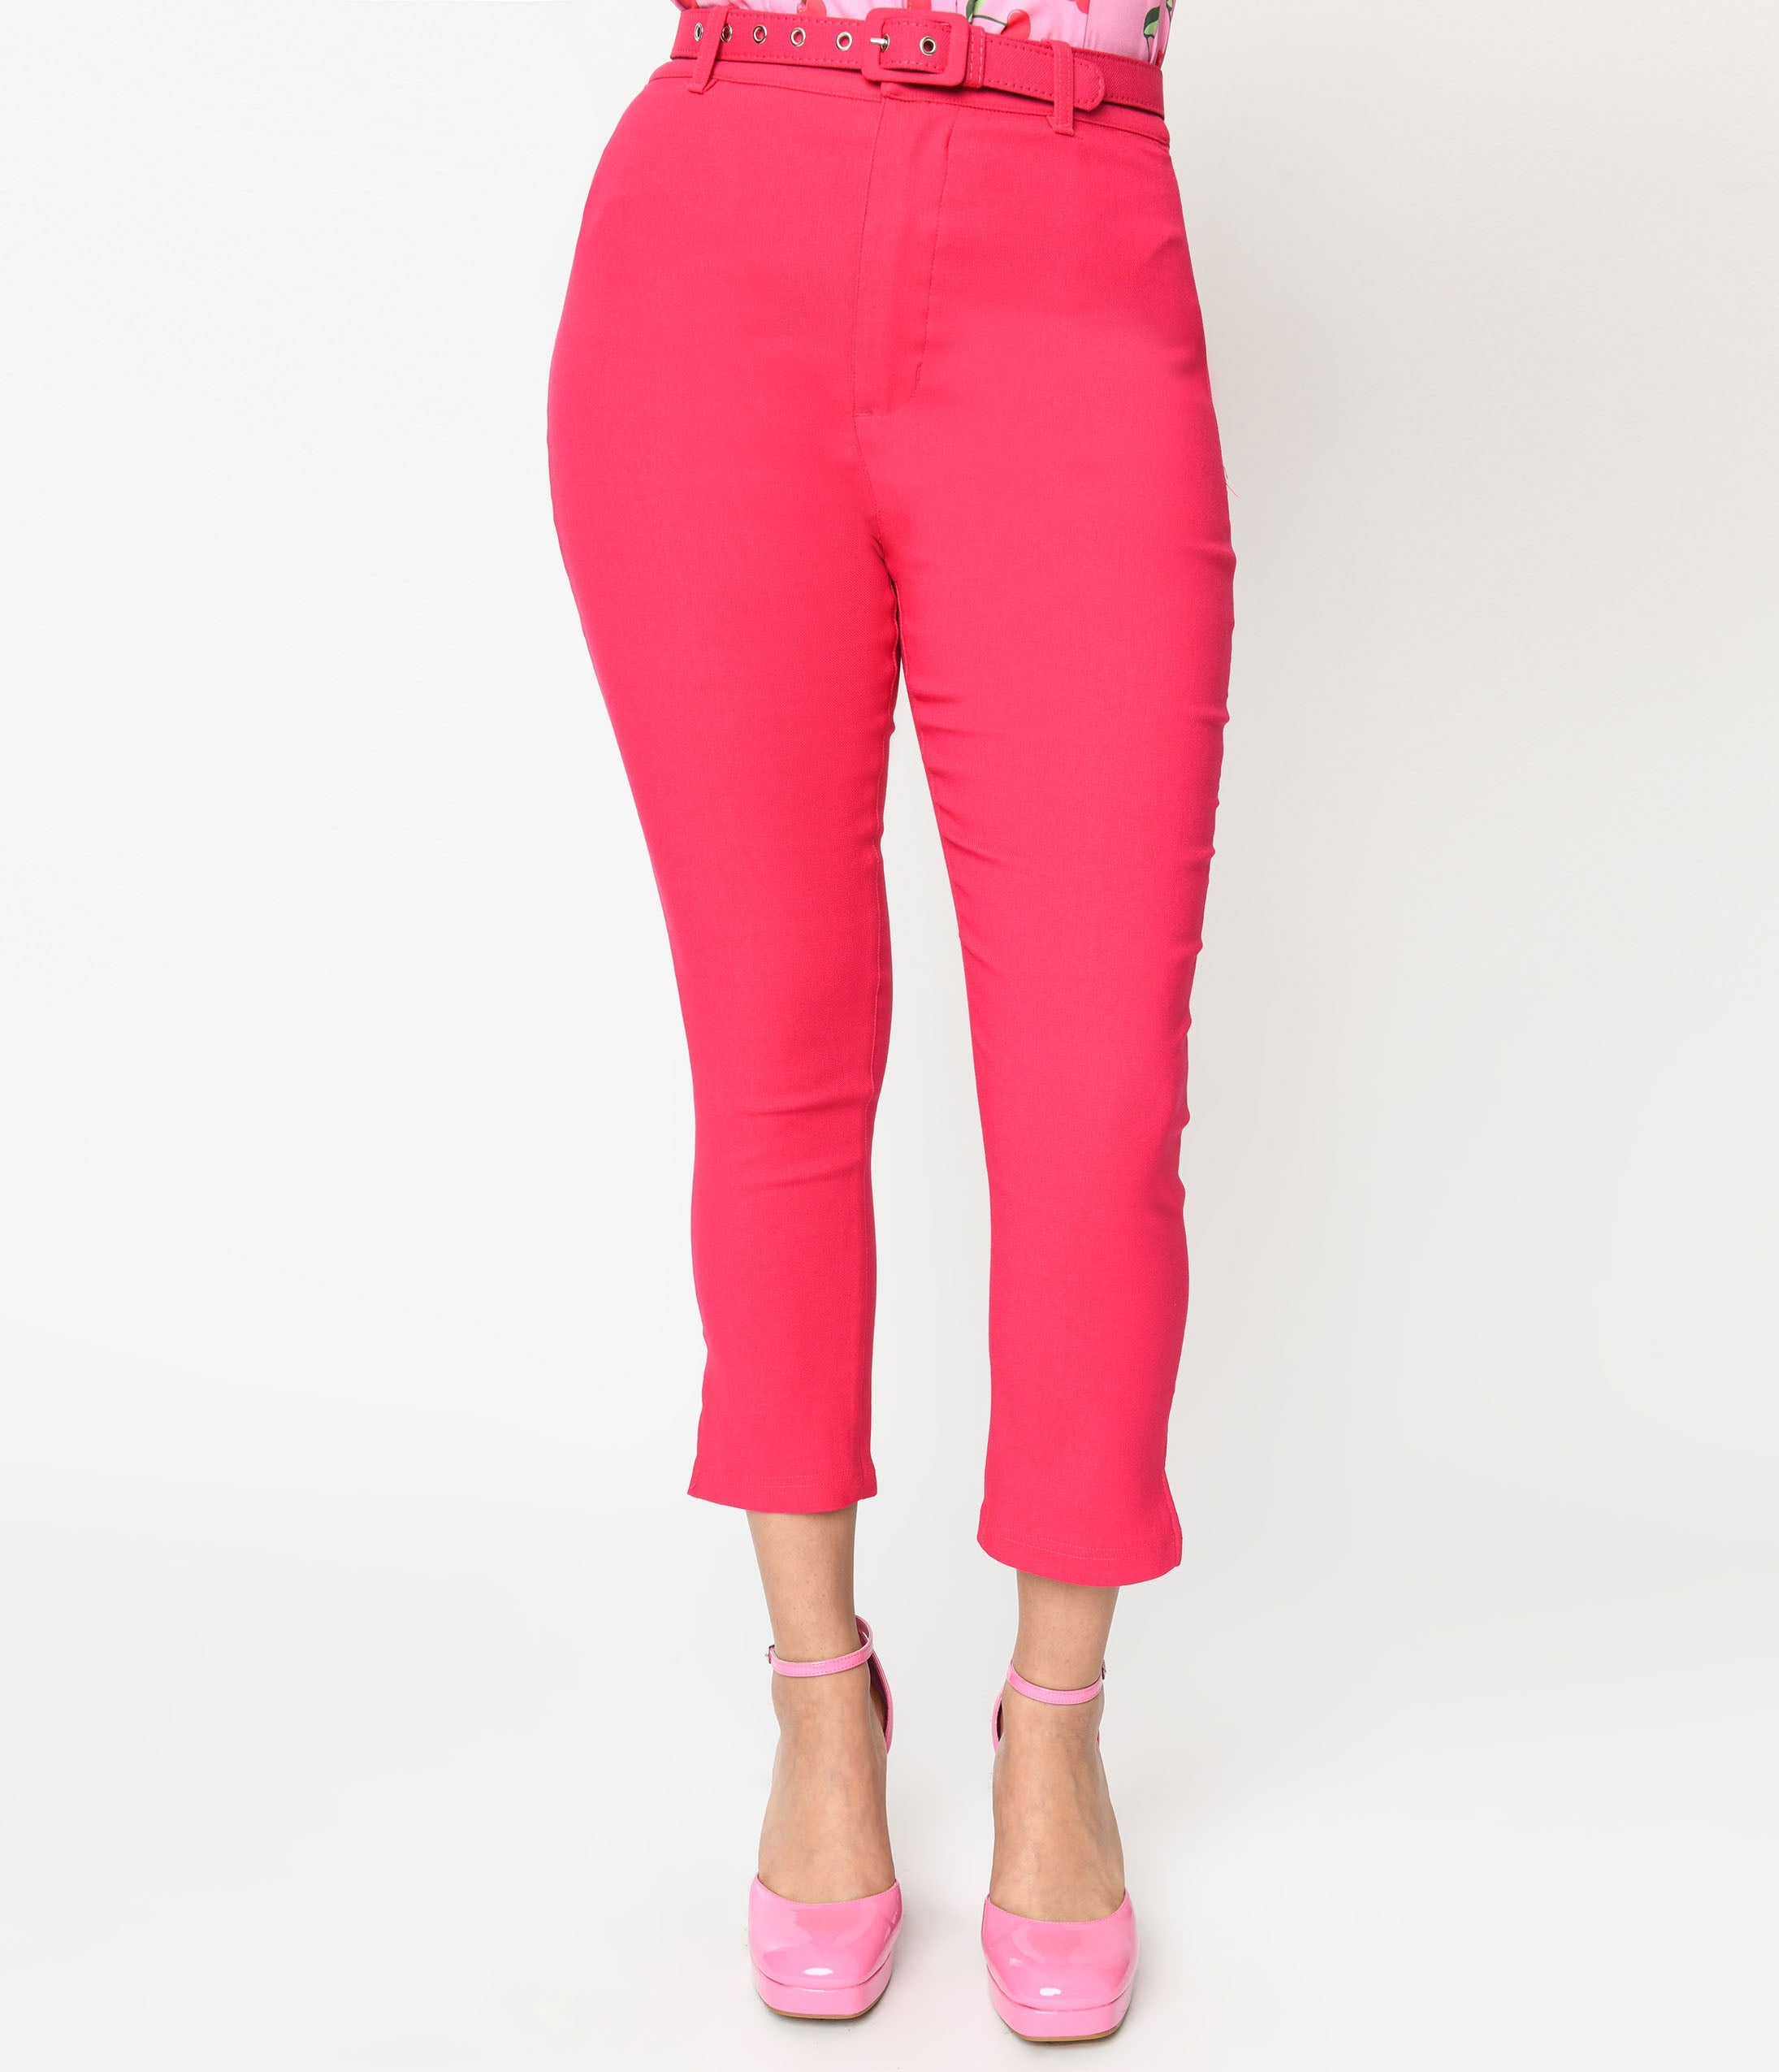 Double Breasted Hot Pink Pants Suit For Women Perfect For Business,  Weddings, Red Pink Carpet Parties And More! From Greatvip, $66.88 |  DHgate.Com